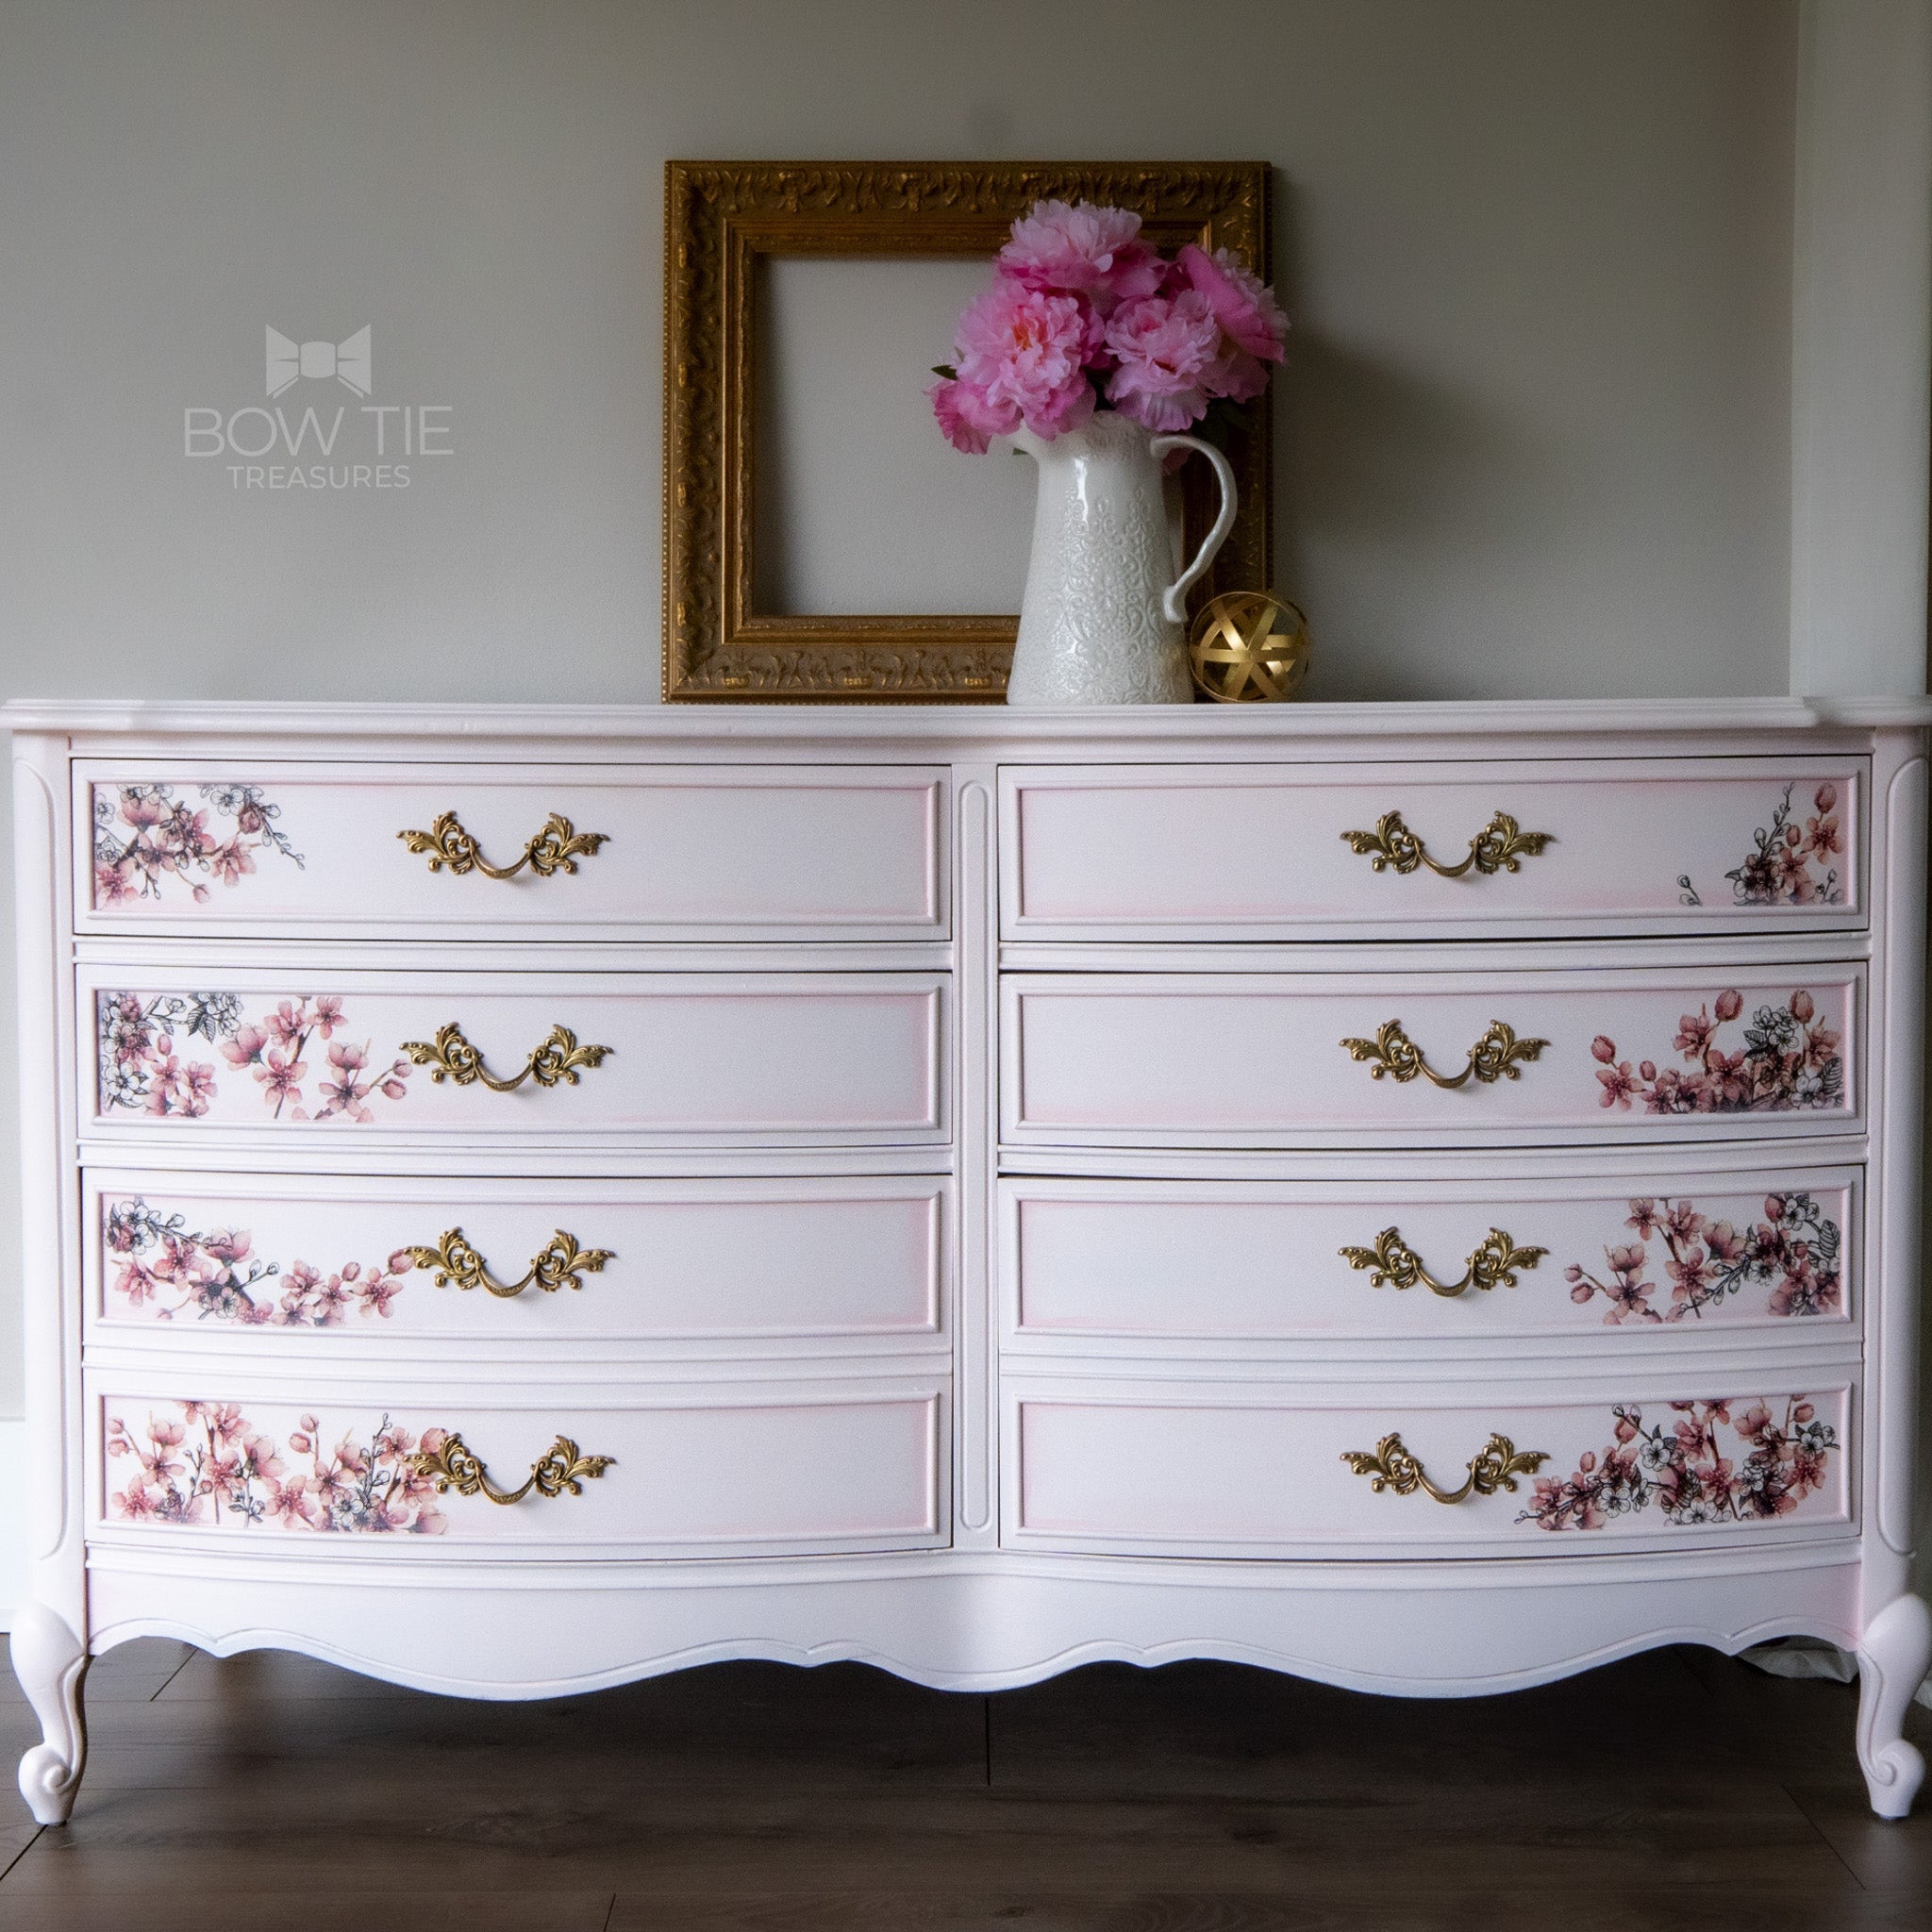 A vintage 8-drawer dresser refurbished by Bow Tie Treasures is painted in Dixie Belle's Soft Pink chalk mineral paint and has pink flower transfers on the drawers.